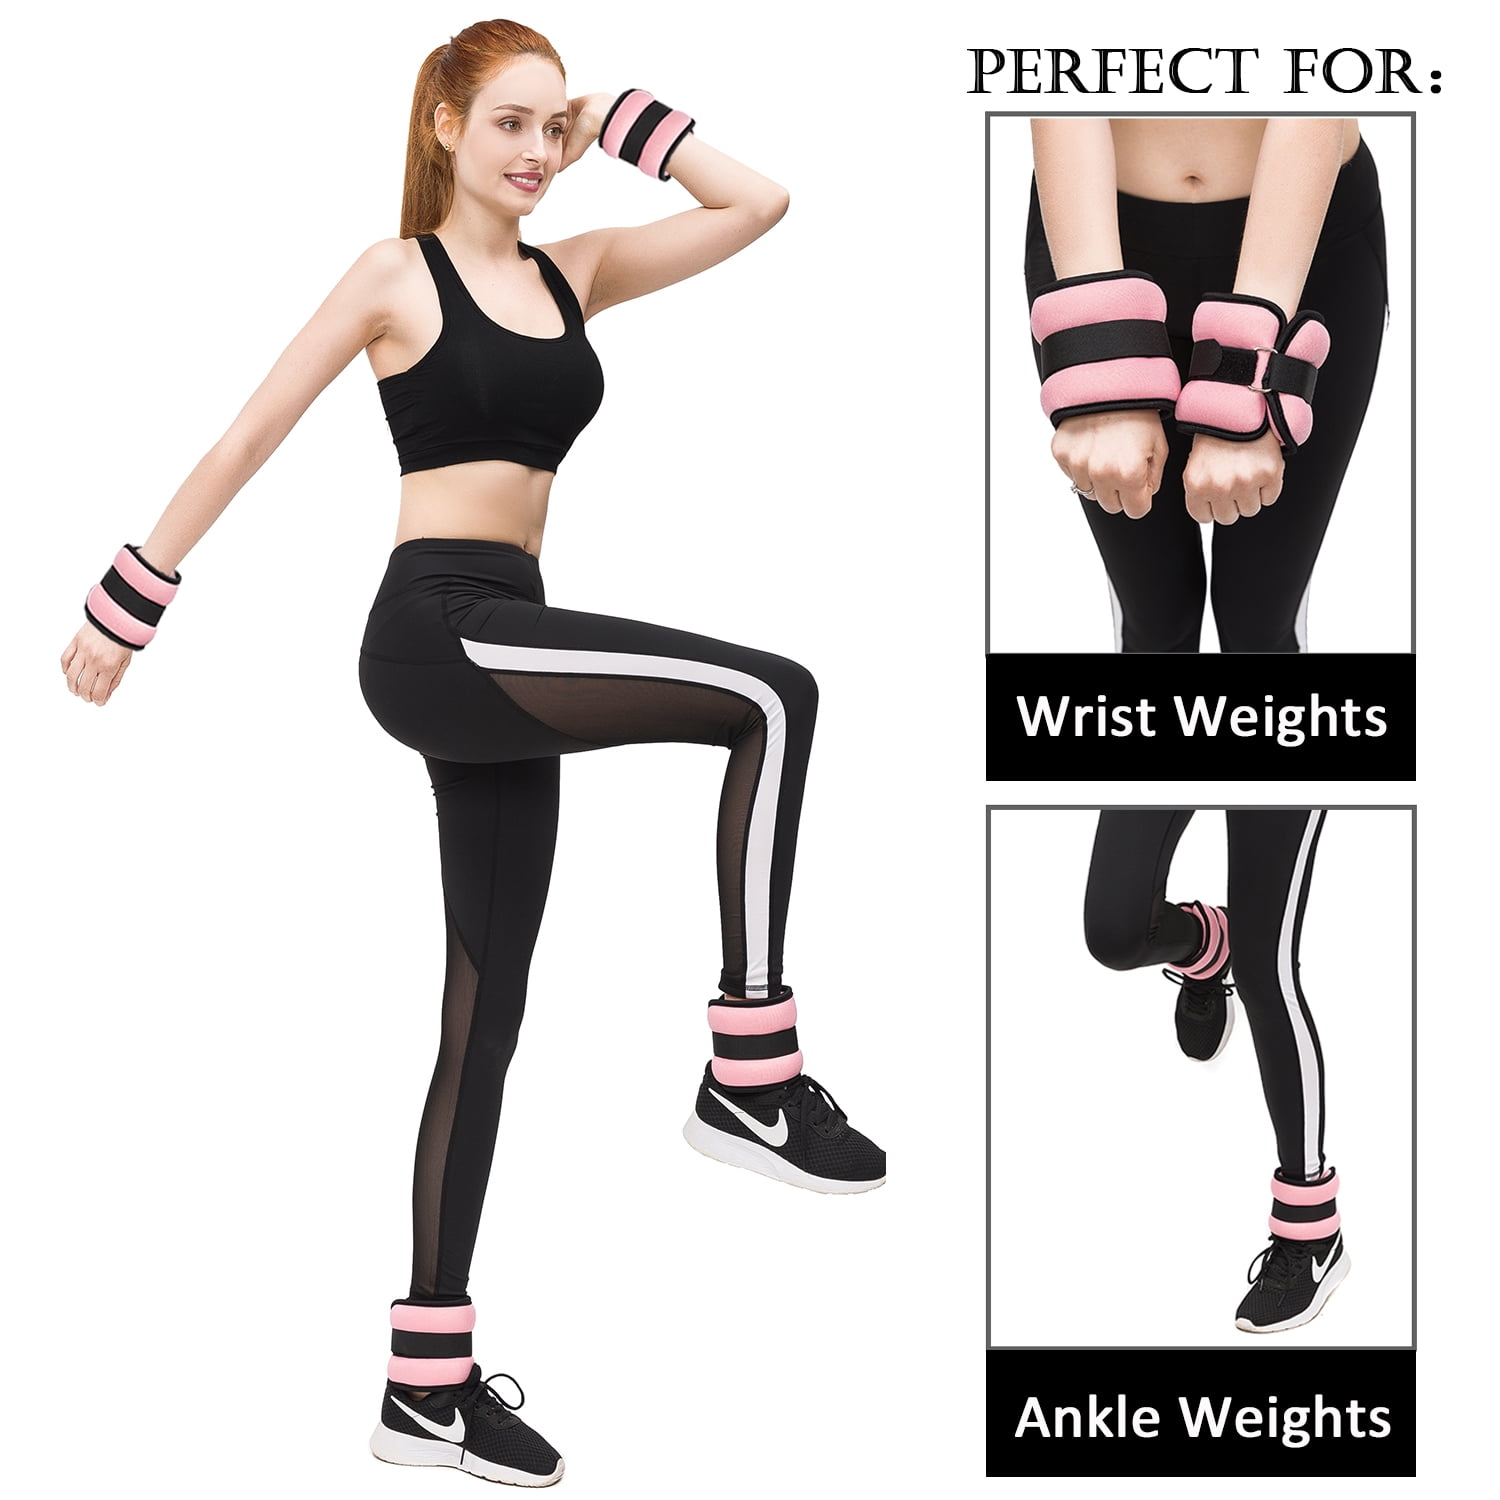 Vaupan Ankle/Wrist Weights Small Leg Arm Hand Cuff Weights for Women Kids Exercise Equipment with Adjustable Straps for Fitness Gym Dancing Walking Jogging Gymnastics Aerobics 1 Pair, 1lb 2lb